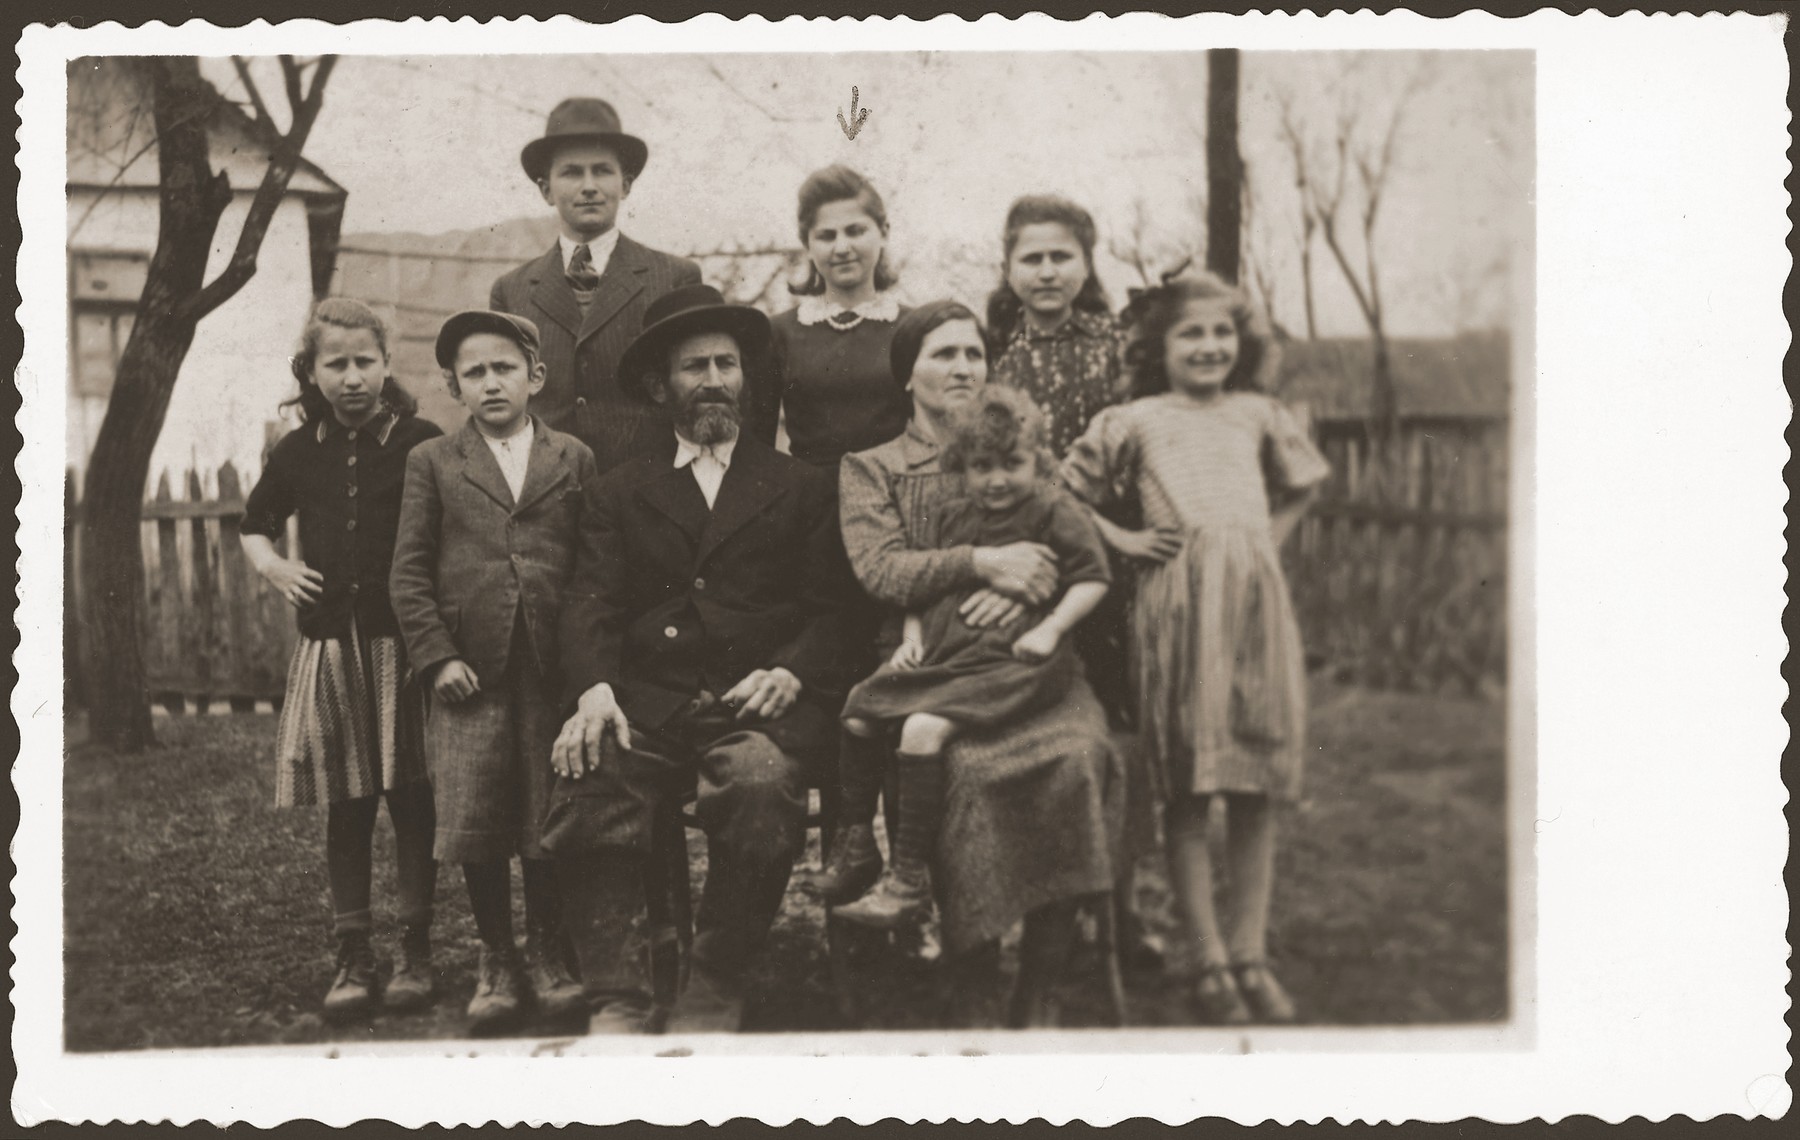 Group portrait of members of a Jewish family in the yard of their home in Volovec.  

Pictured are members of the Kreisman family.  Frida Kreisman is in the back row, center.